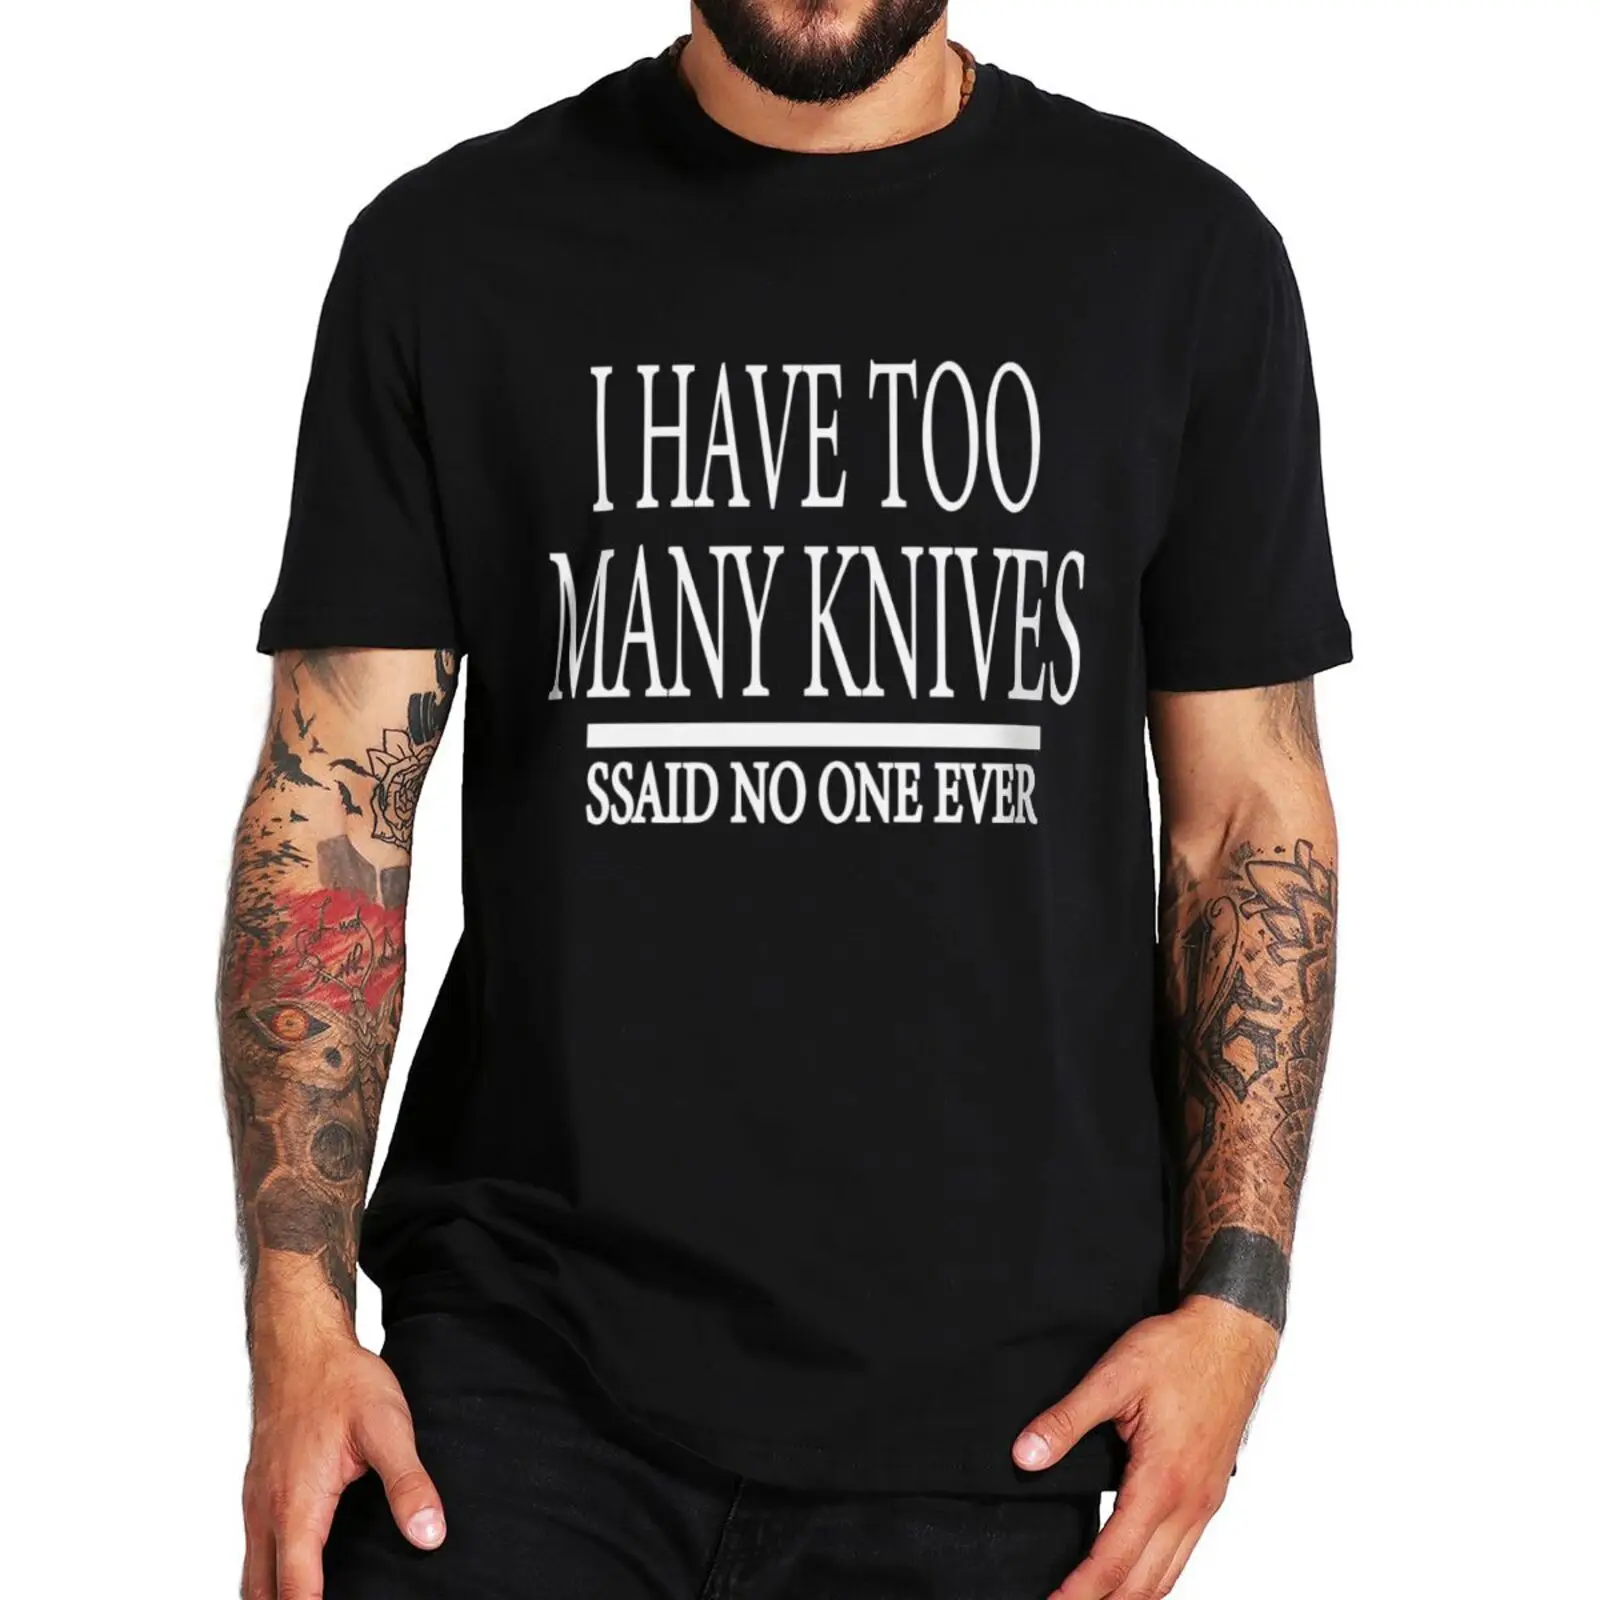 

I Have Too Many Knives Said No One Ever T-Shirt Funny Memes Jokes Humor Short Sleeve Casual Cotton Unisex Summer T Shirt